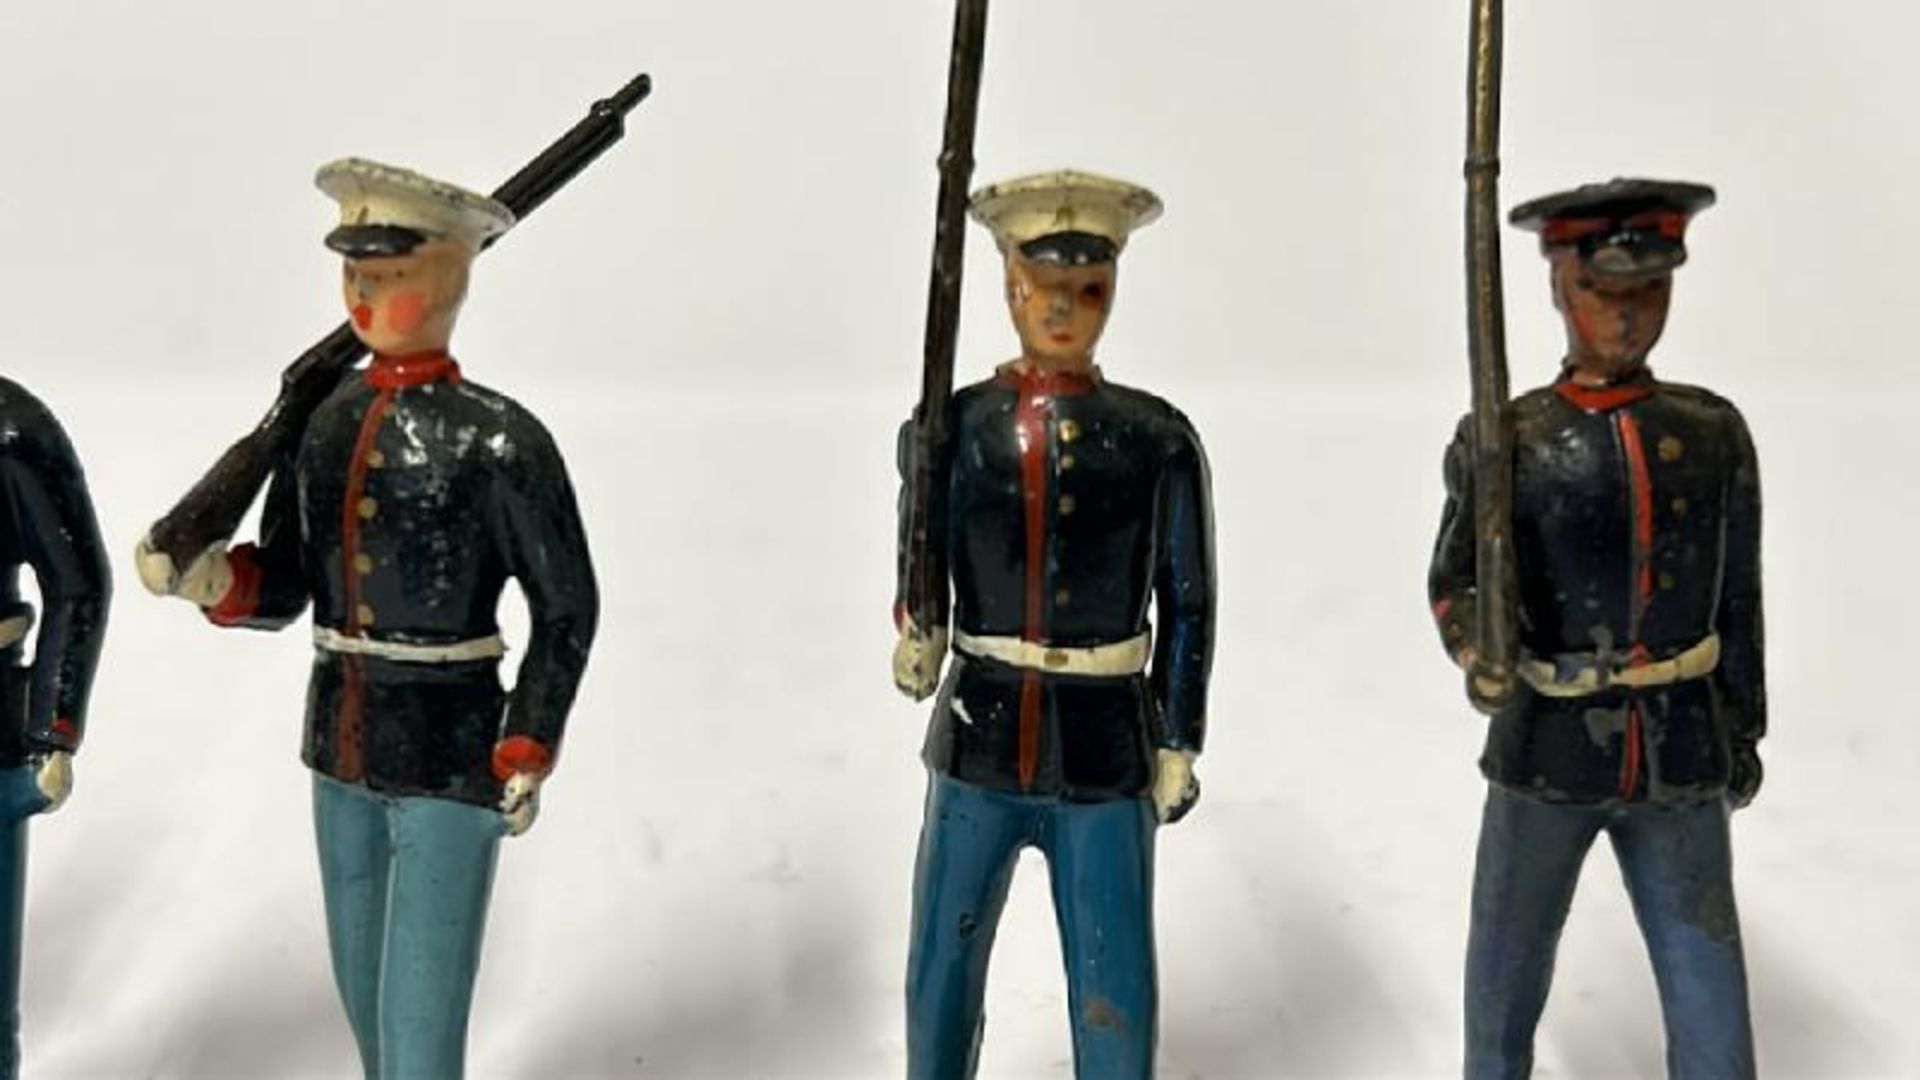 Assorted Britains lead soldiers including Grenadier guards, U.S. Marines and Foot Infantry - Image 13 of 14